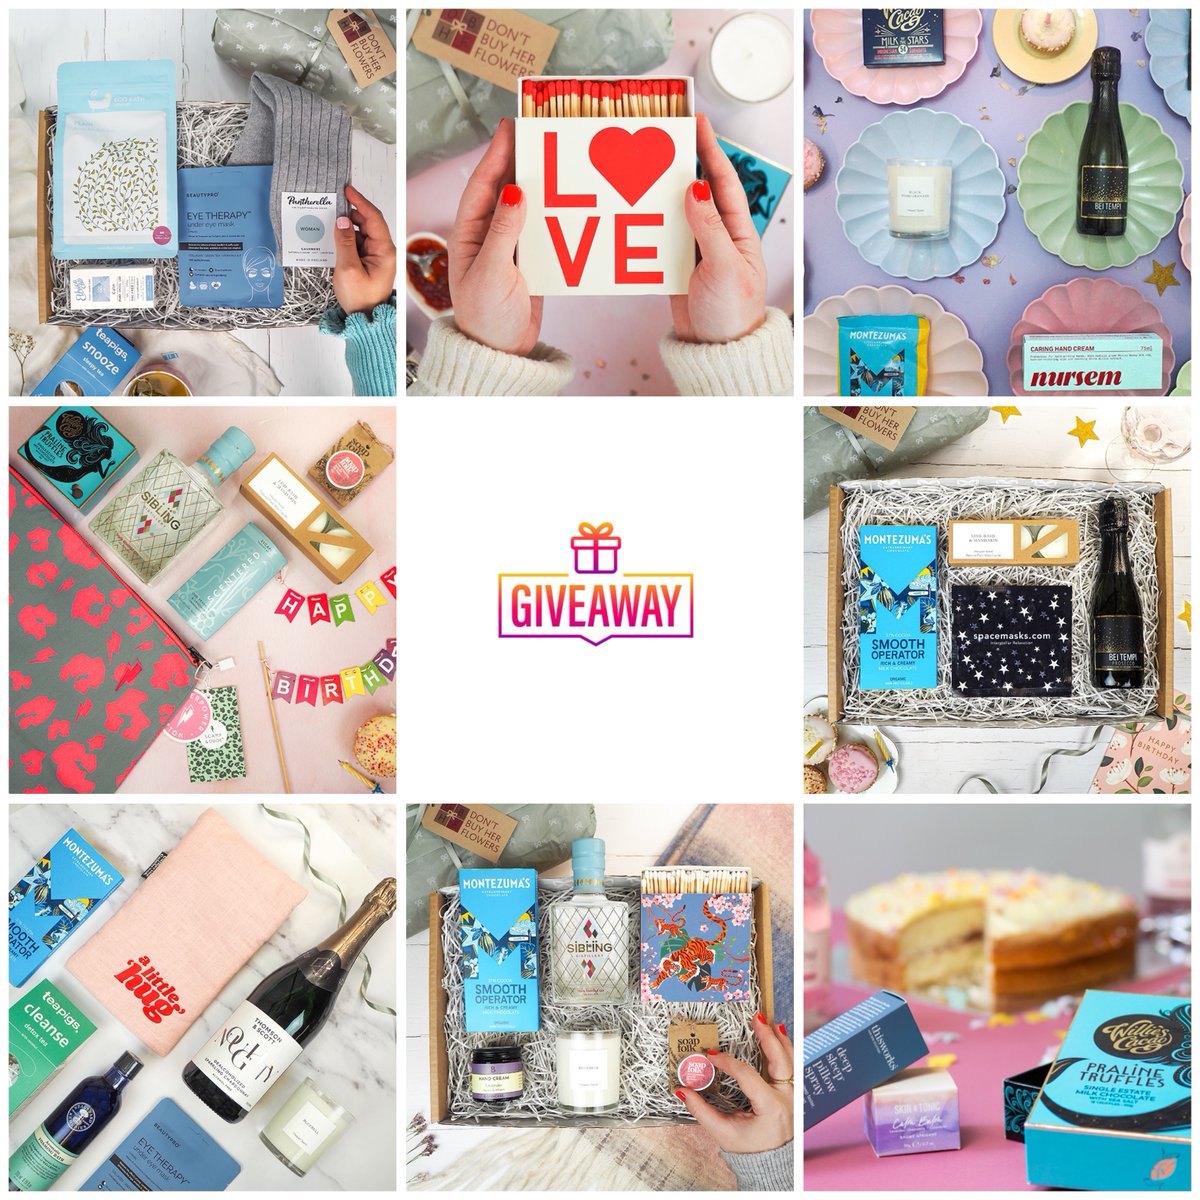 WIN PRIZES! @britainsmallbiz are brightening your January blues by giving away 5 fantastic hampers worth £100 each from @DBHFgifts! 🎁 Fill form to enter: bit.ly/3Sl092z 📅 Join Mat & Steph @DBHFgifts live on Wednesday 24th Jan at 1pm: ow.ly/2GLE50Qrrka